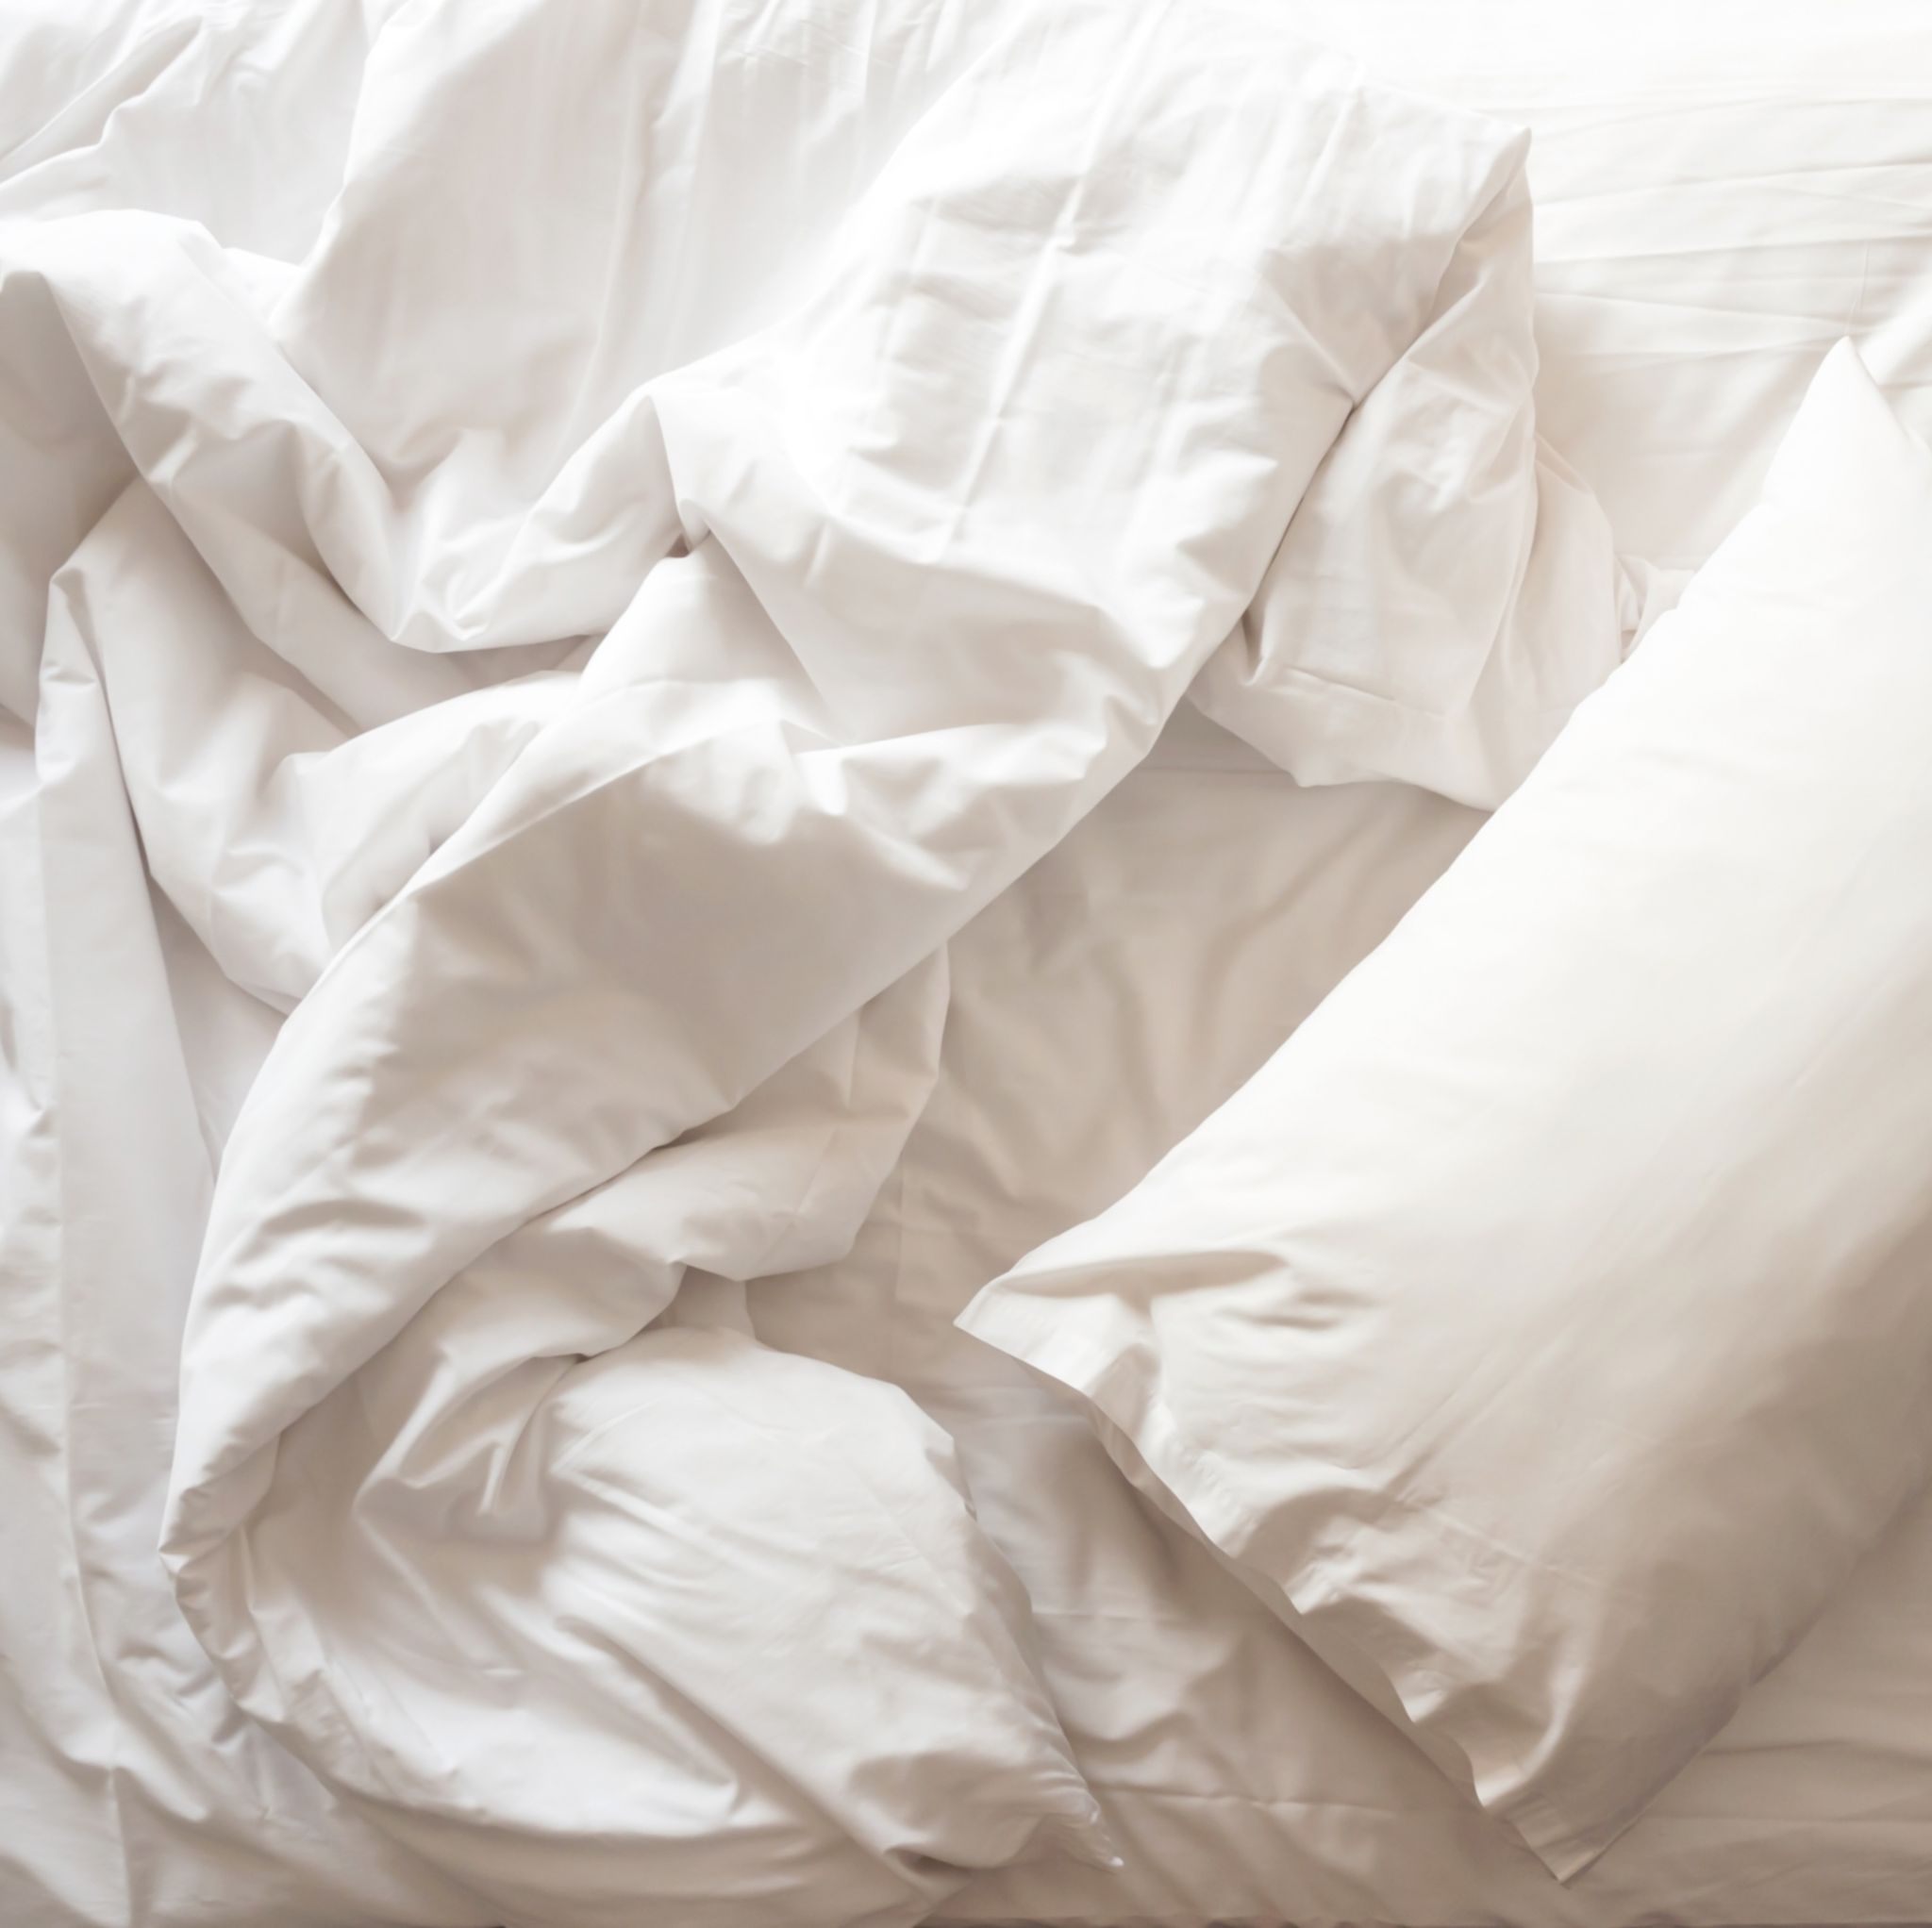 9 common mattress and bedding cleaning myths debunked